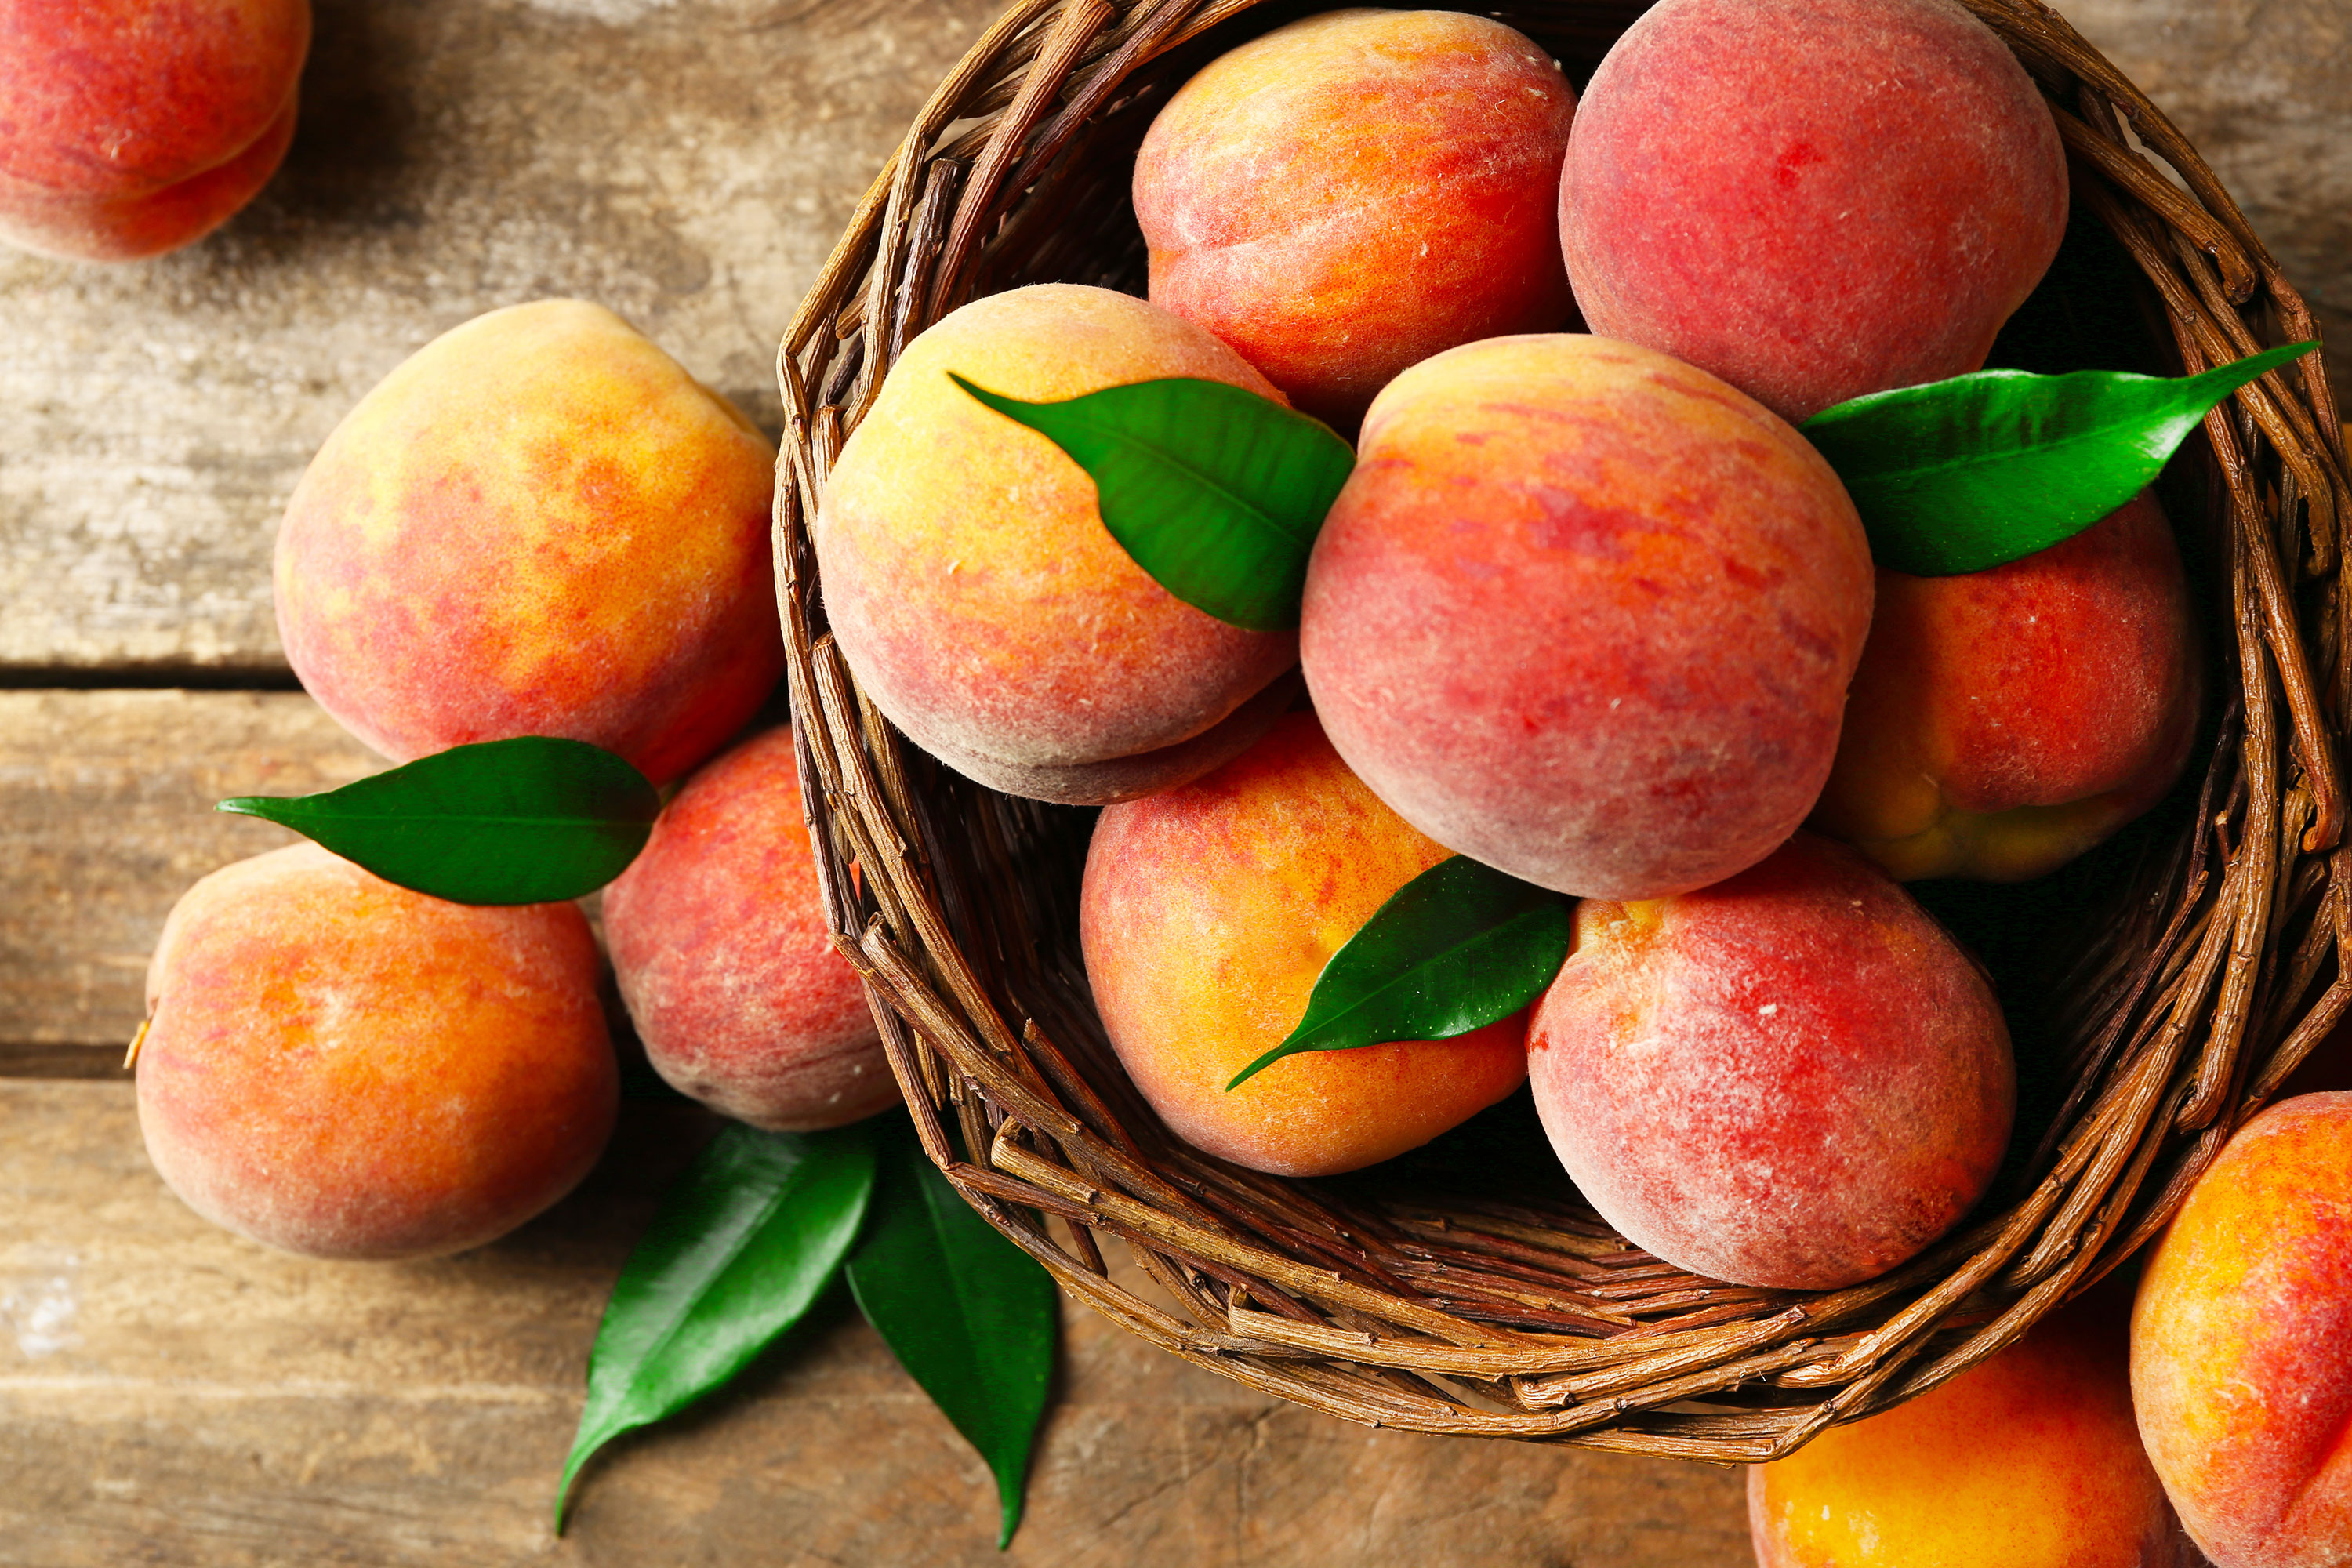 Pick Up Peaches Before the Season Ends - Farmview Market